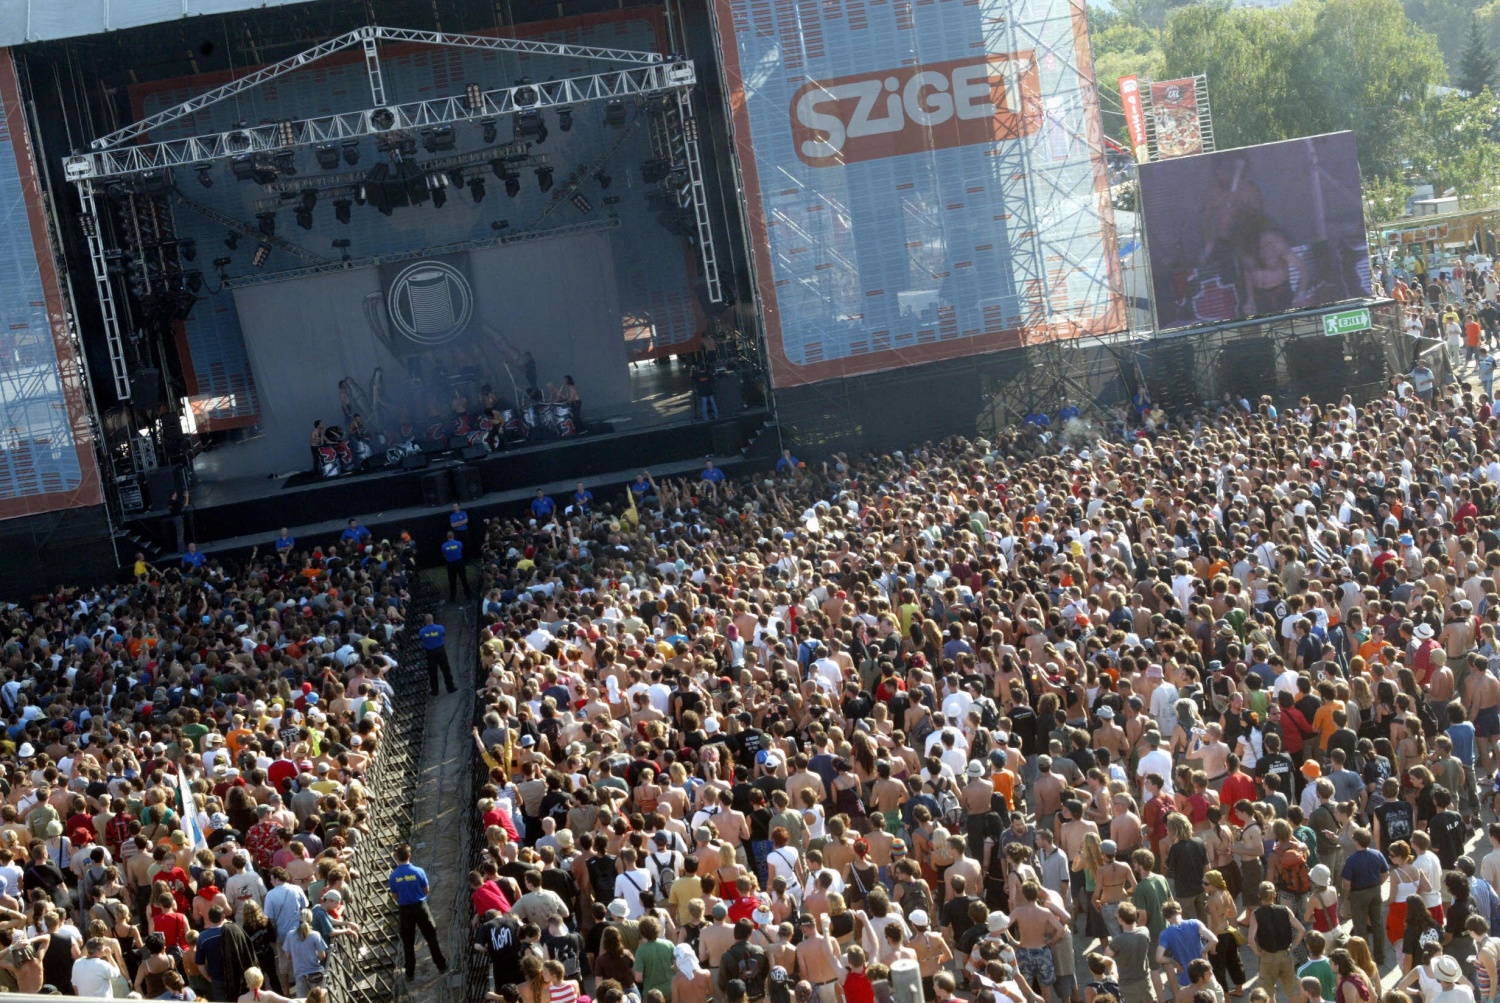 SZIGET 2023 Lineup Revealed: Lorde, Mumford & Sons, Loyle Carner, More!